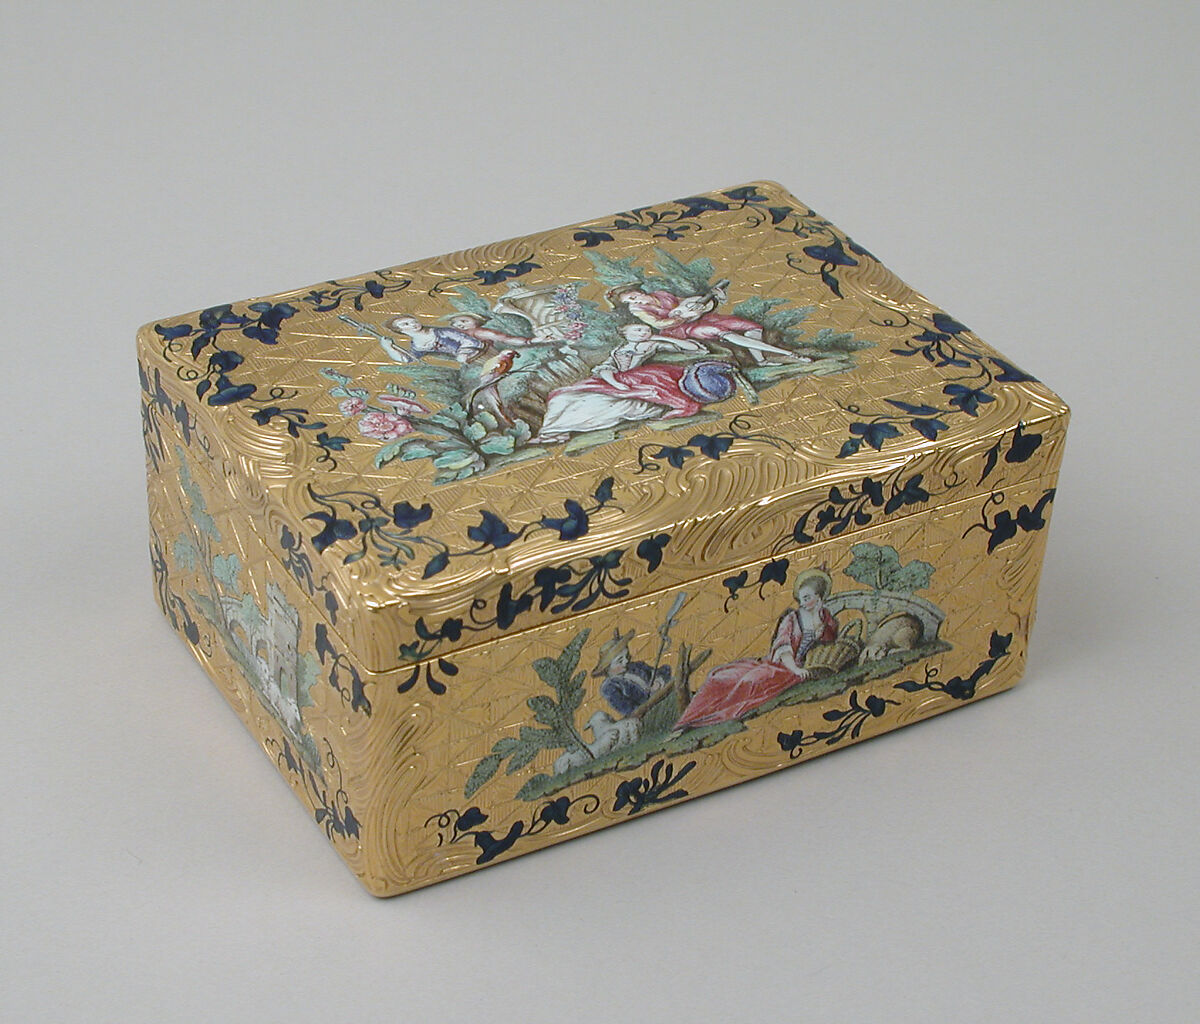 Snuffbox, Probably by Claude Lisonnet (French, master 1736, died 1761), Gold, enamel, French, Paris 